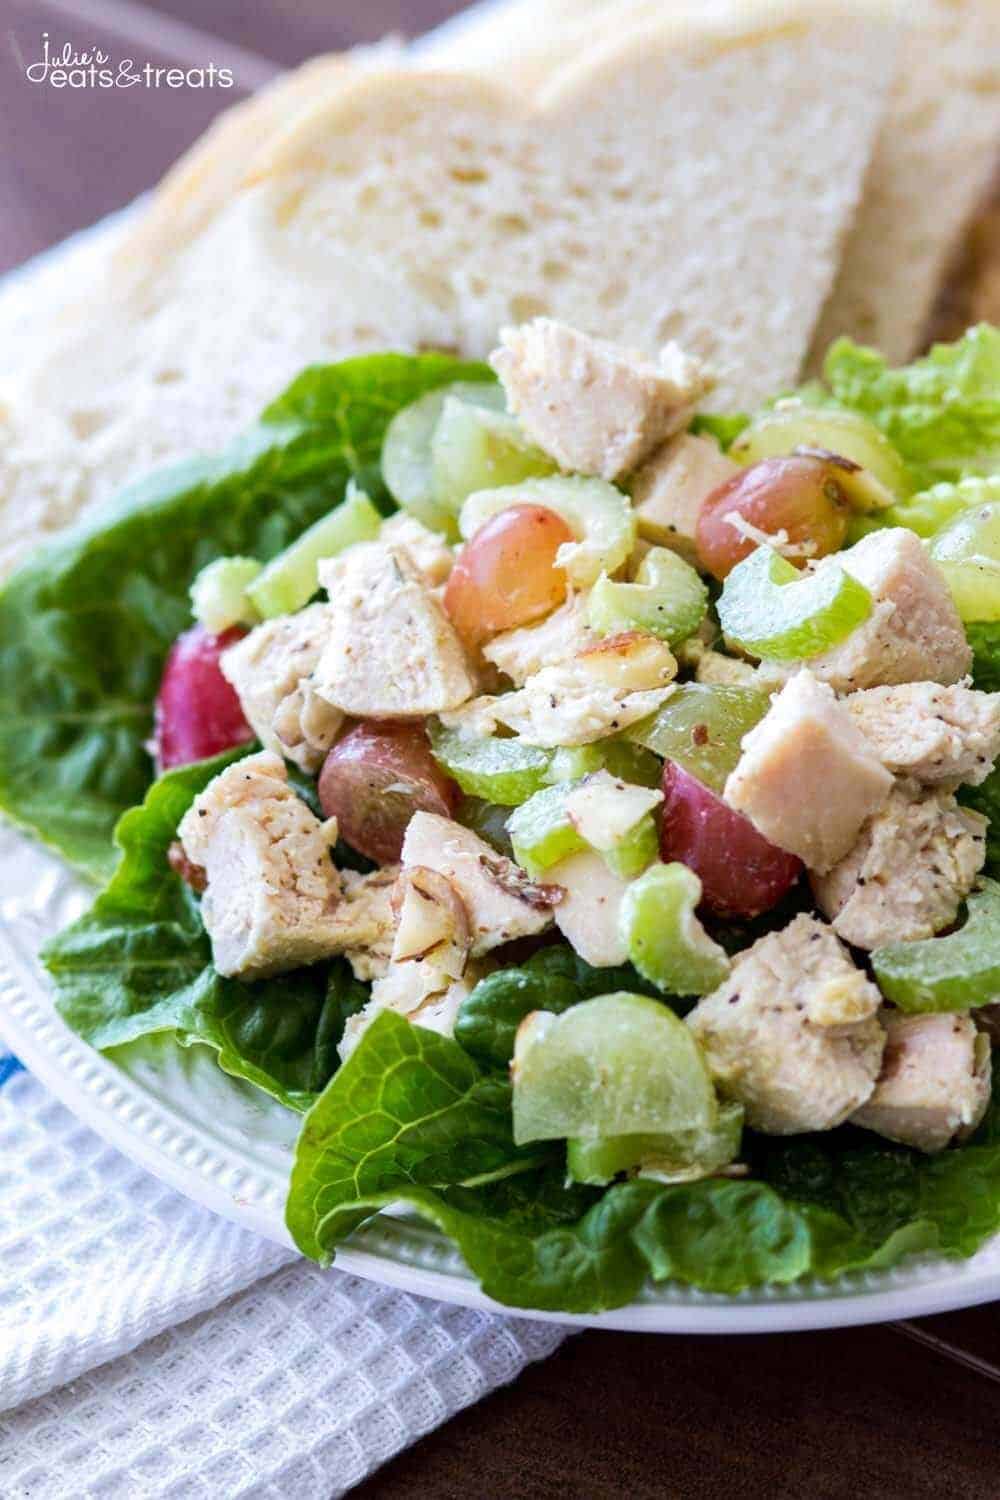 Chicken salad with grapes and lettuce on a plate.